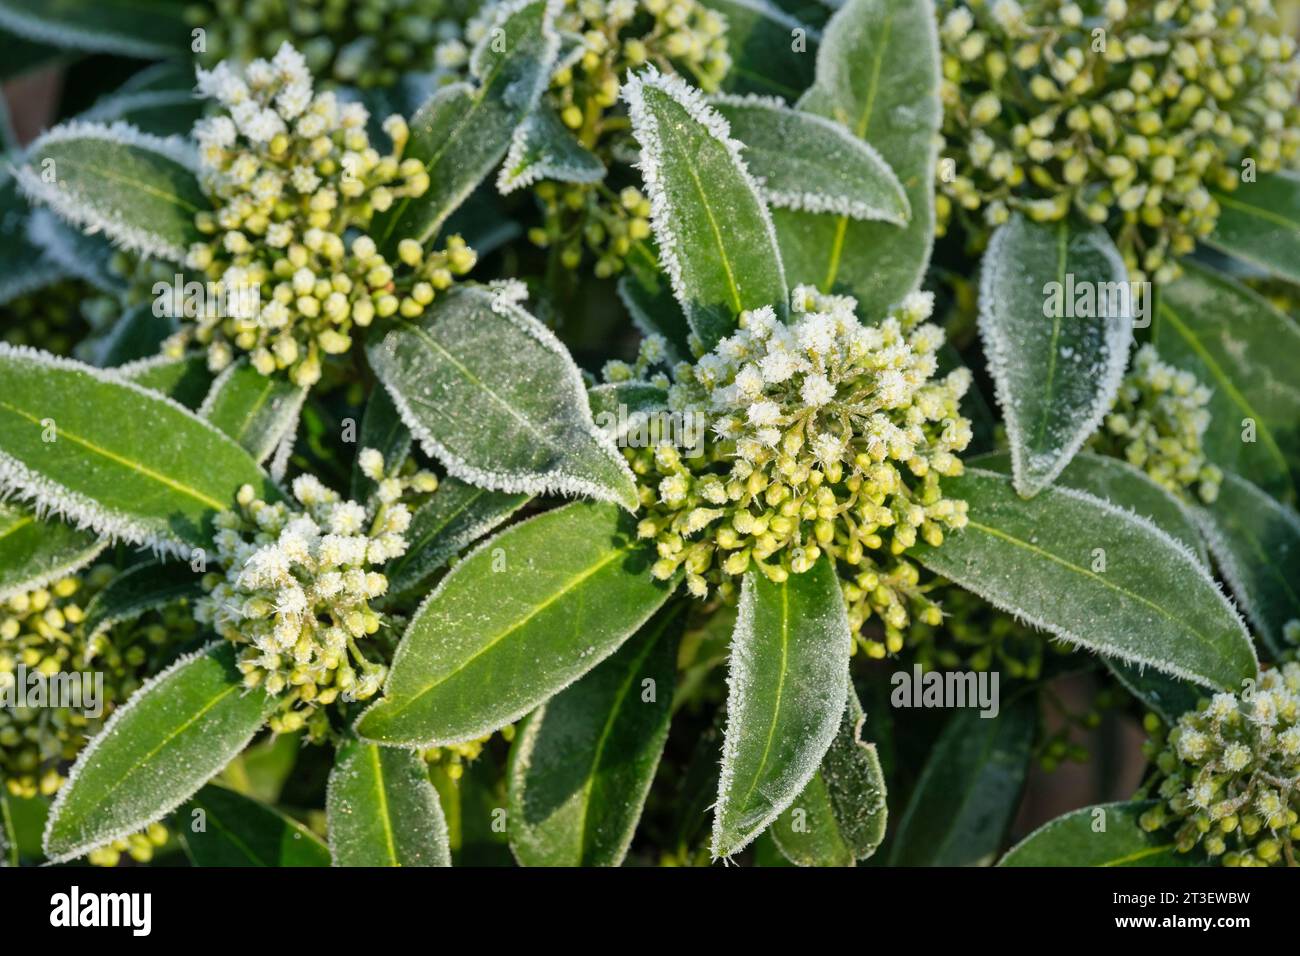 Skimmia × confusa Kew Green, skimmia Kew Green, Skimmia japonica Kew Green, large clusters of frost covered small, greenish-yellow flowers in spring Stock Photo